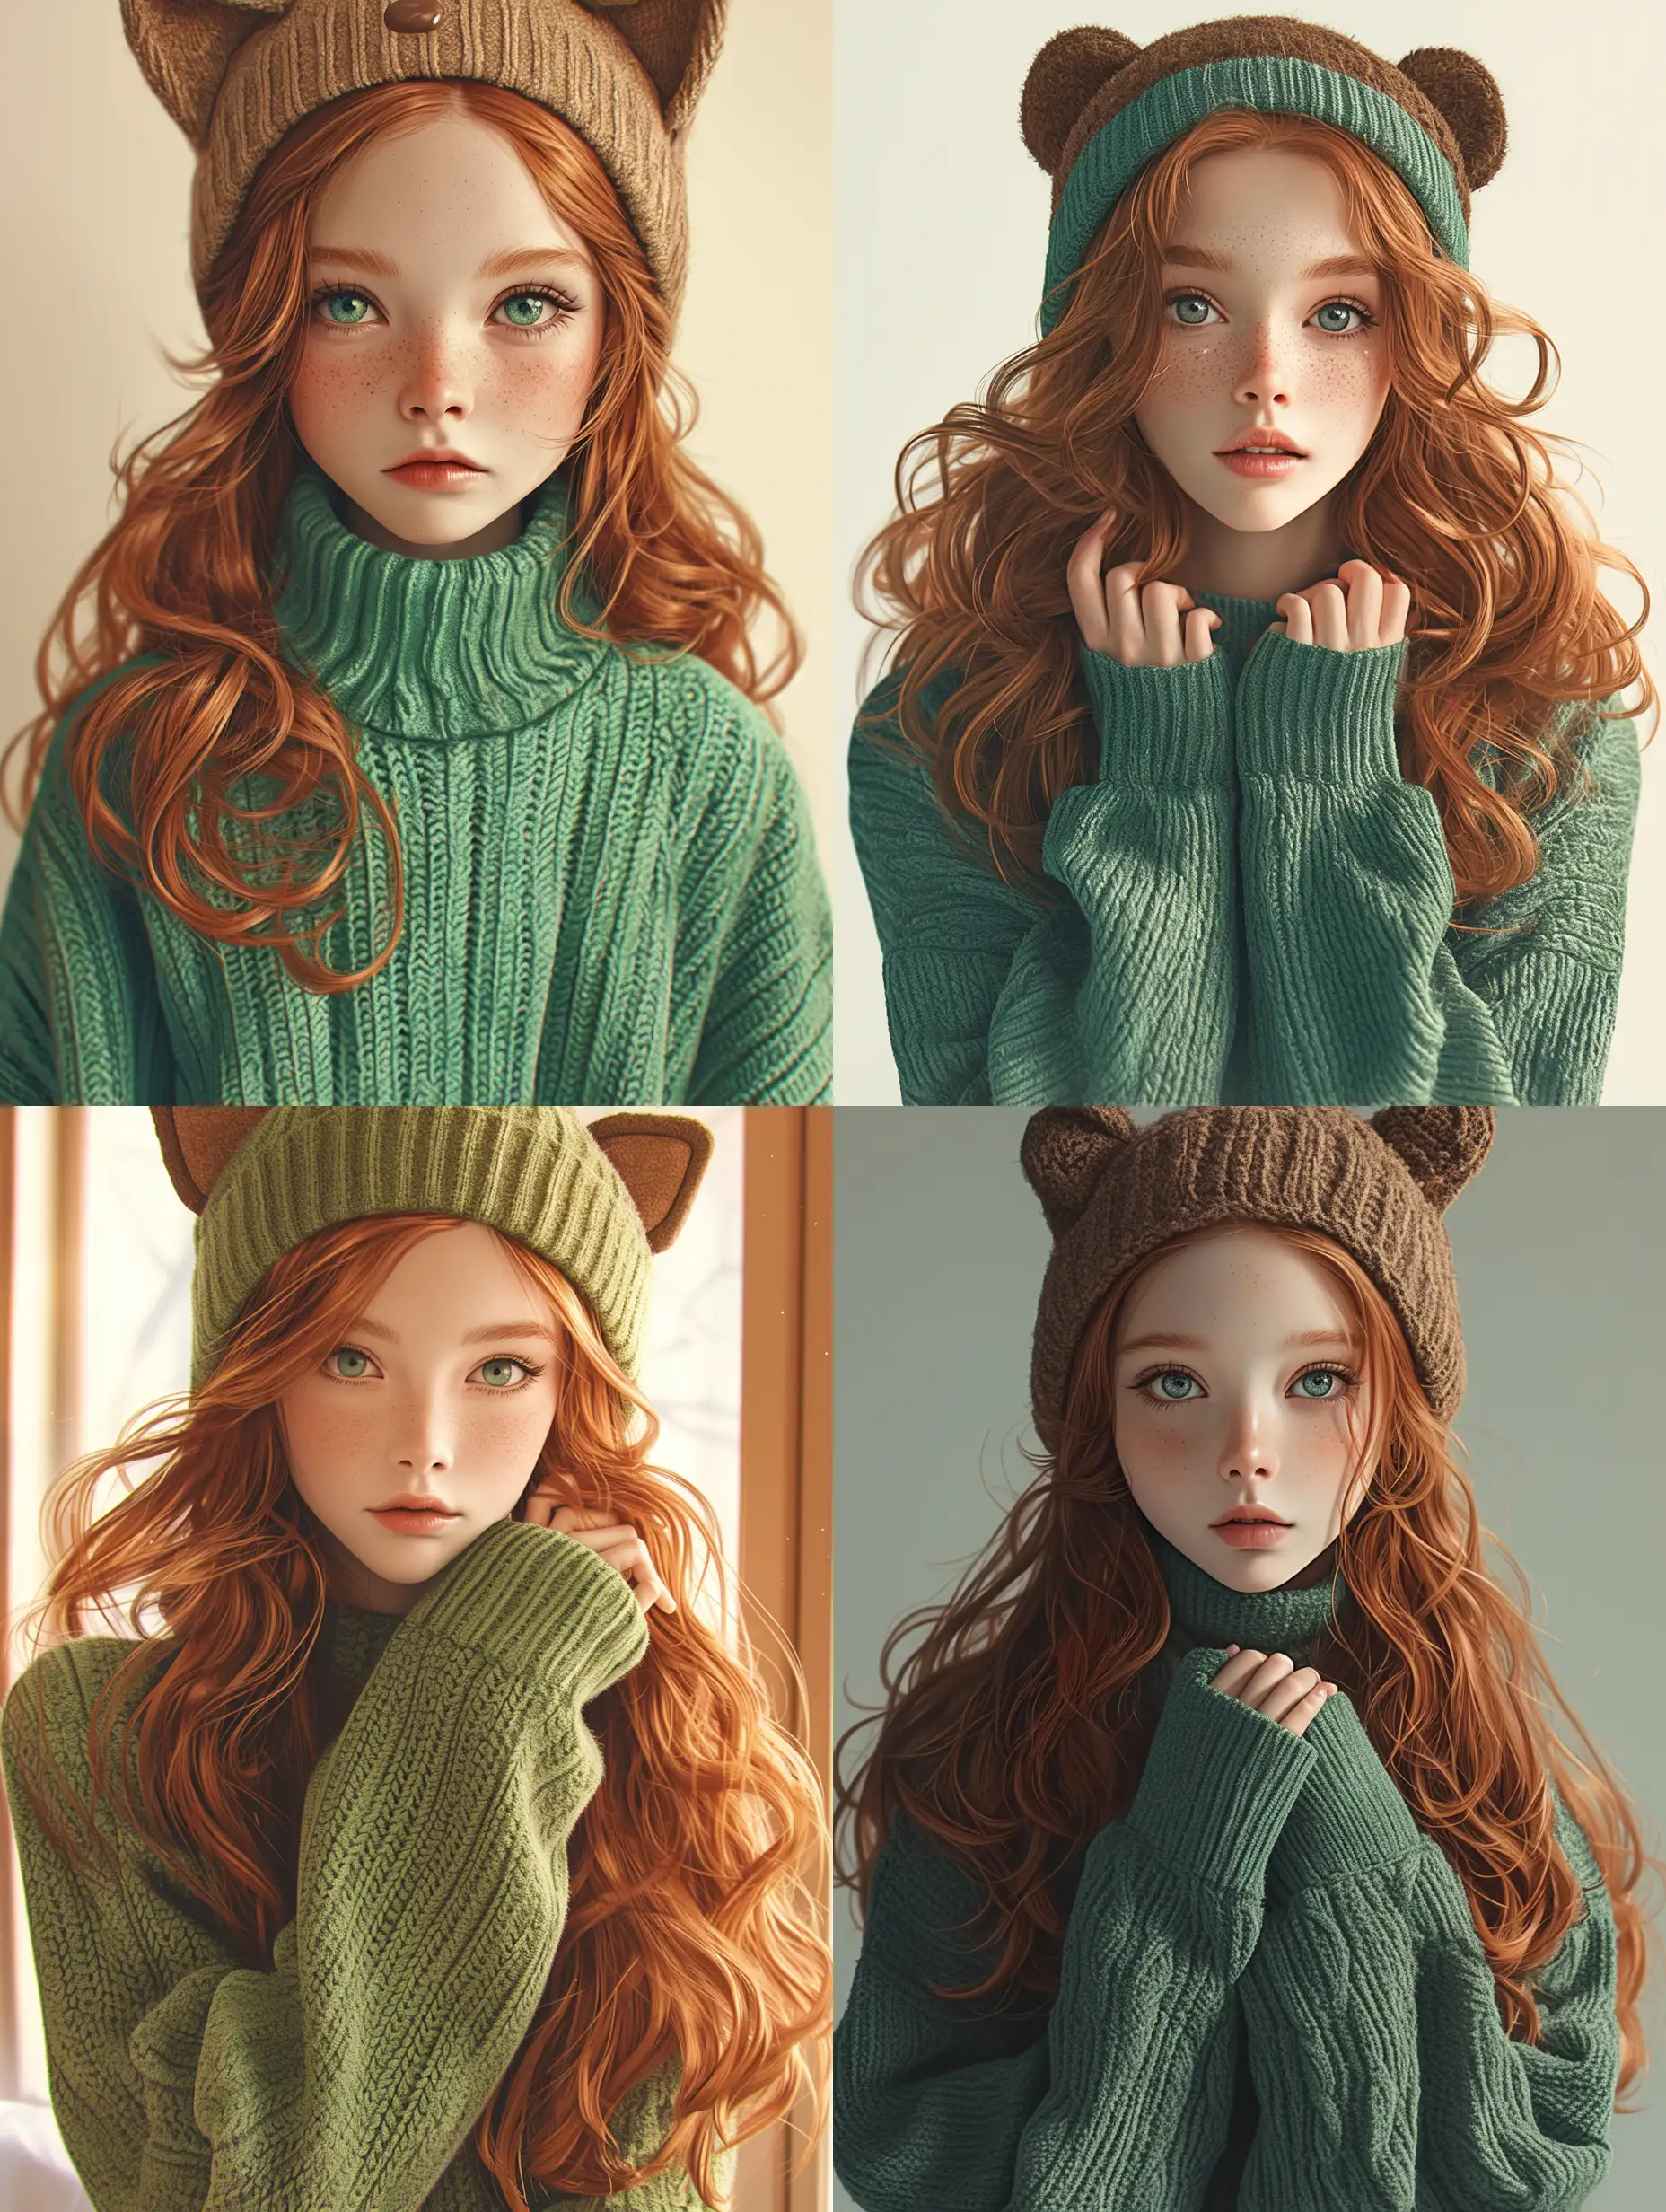 Adorable-AnimeInspired-Ginger-Girl-in-Green-Sweater-and-Animal-Beanie